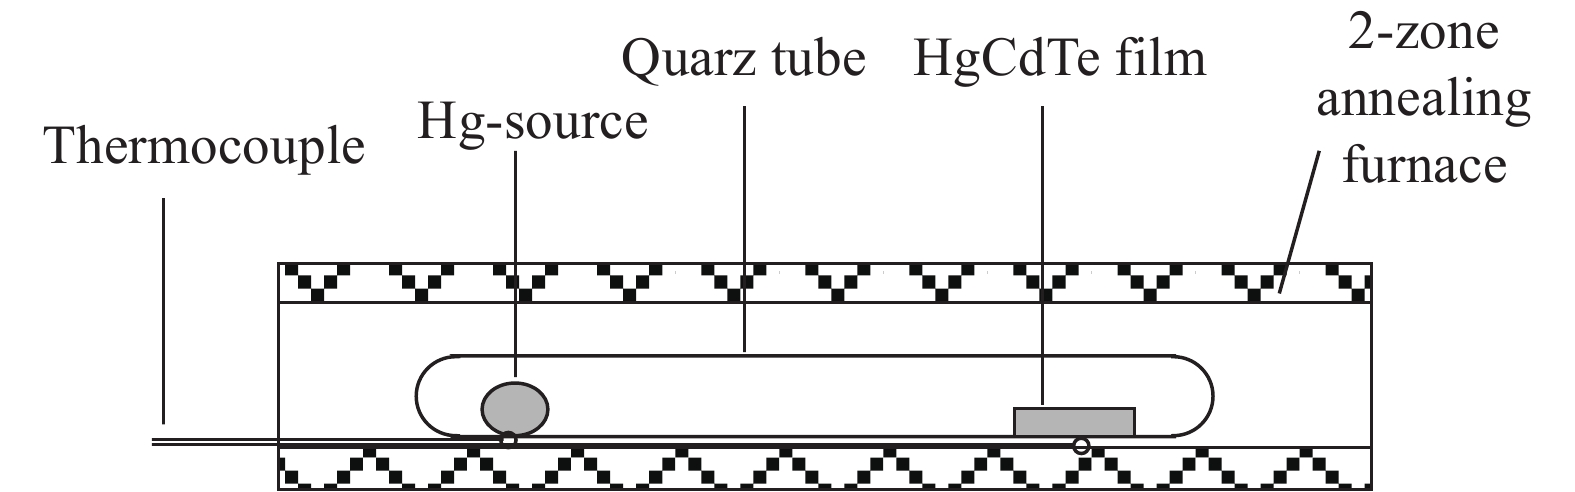 Schematic of the Hg-rich annealing experiment